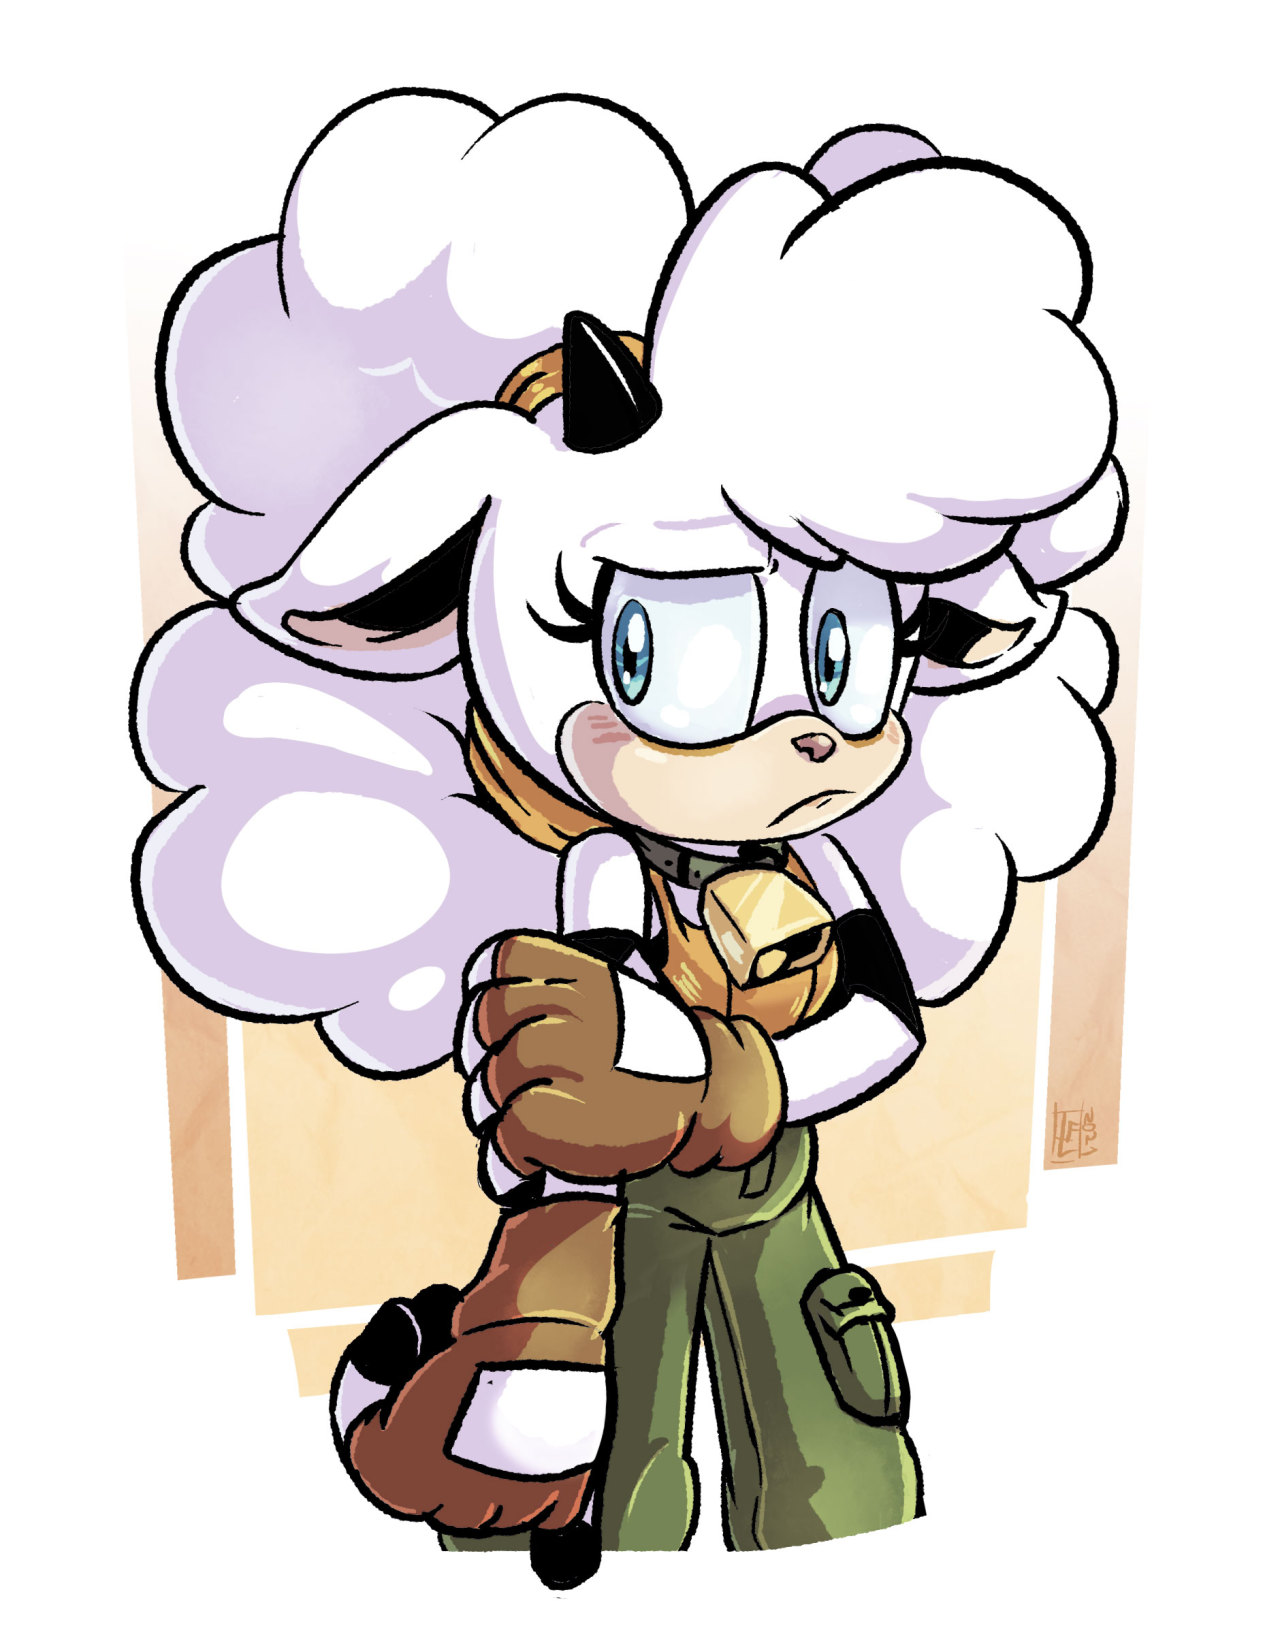 Lanolin the Sheep from the Sonic IDW comic, she was basically a recurring background character since the comic beginning, 